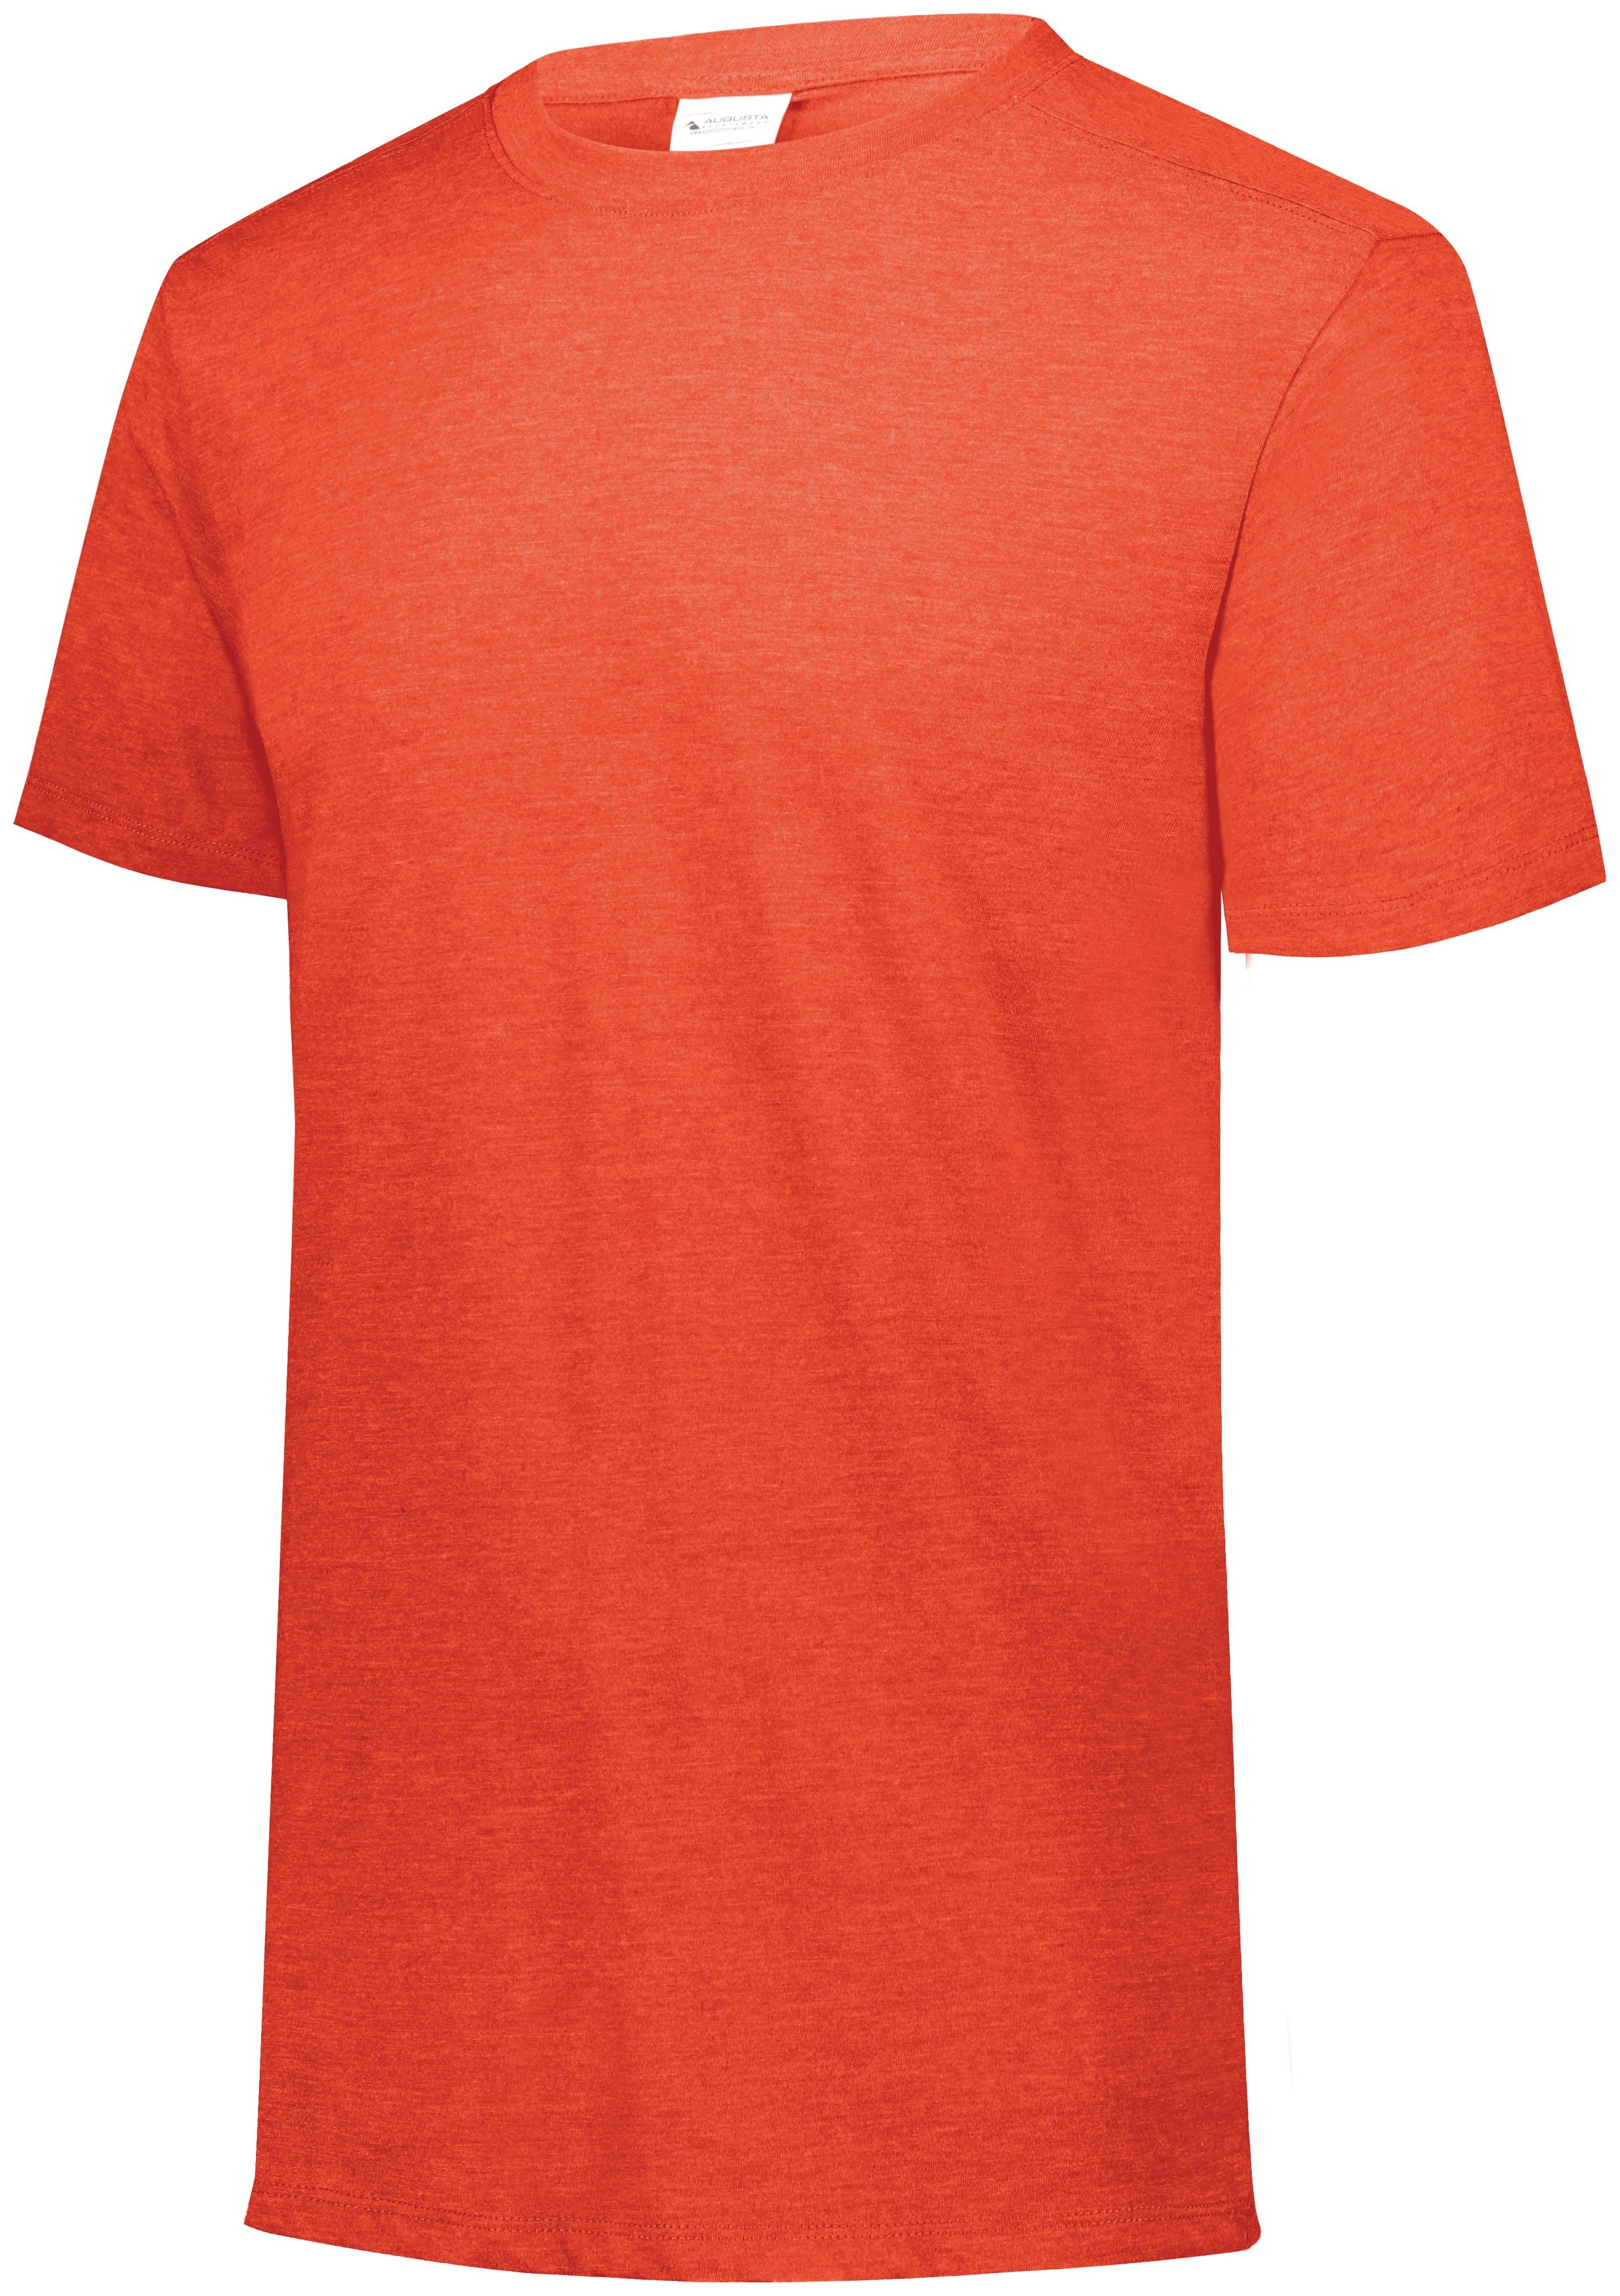 Augusta Sportswear Youth Tri-Blend T-Shirt in Orange Heather  -Part of the Youth, Youth-Tee-Shirt, T-Shirts, Augusta-Products, Shirts product lines at KanaleyCreations.com